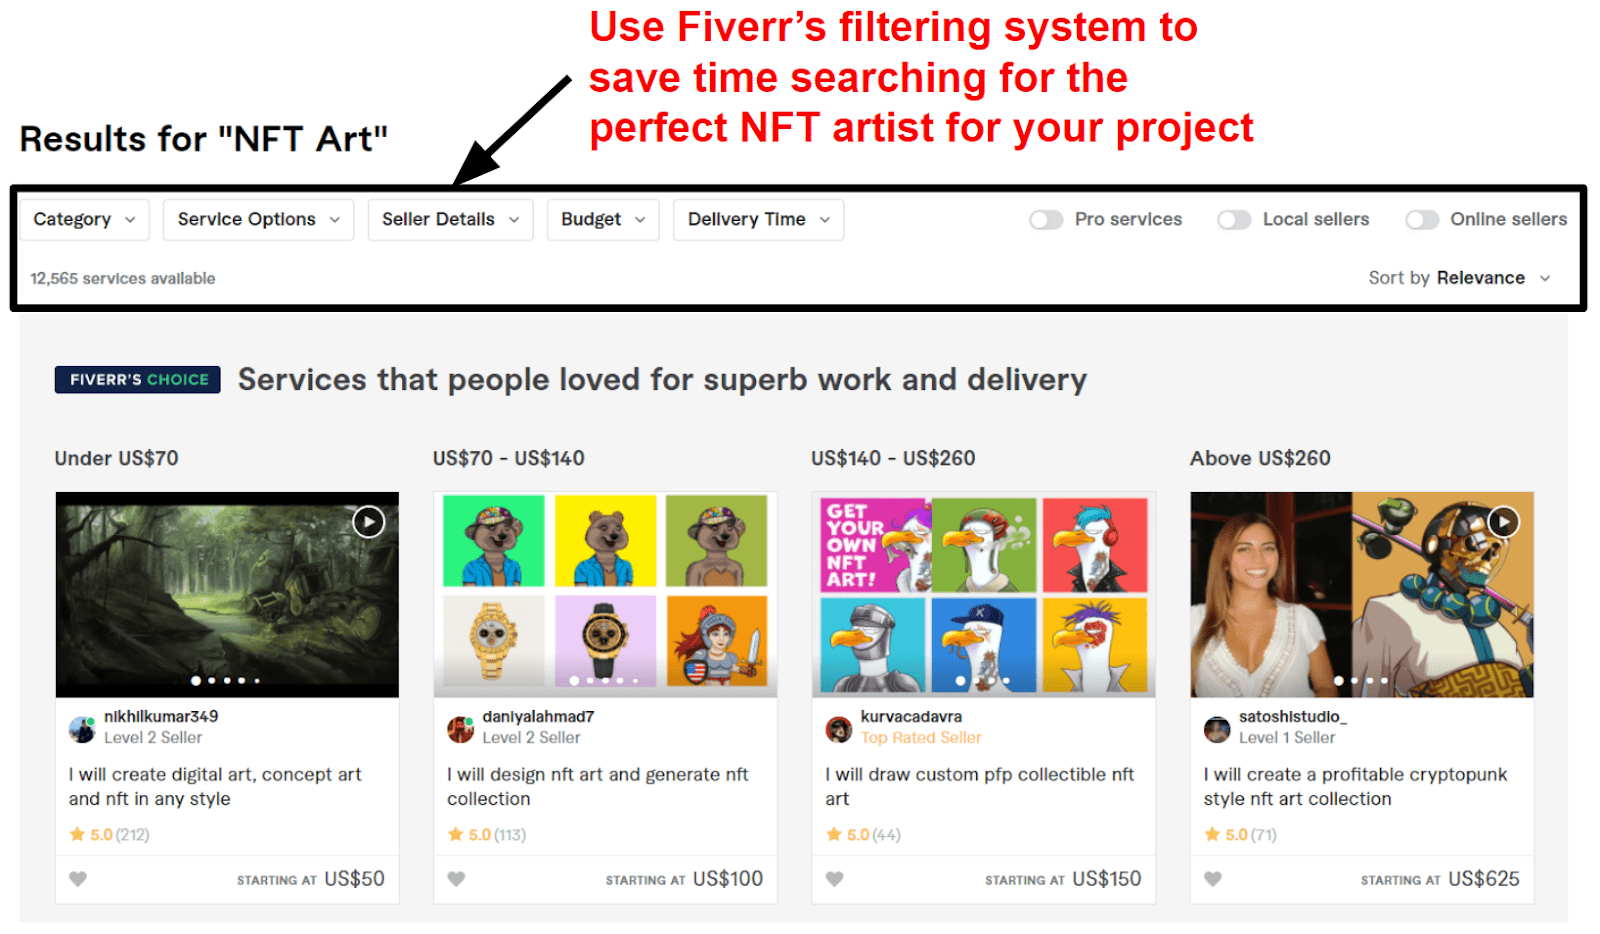 Searching for NFT art on Fiverr